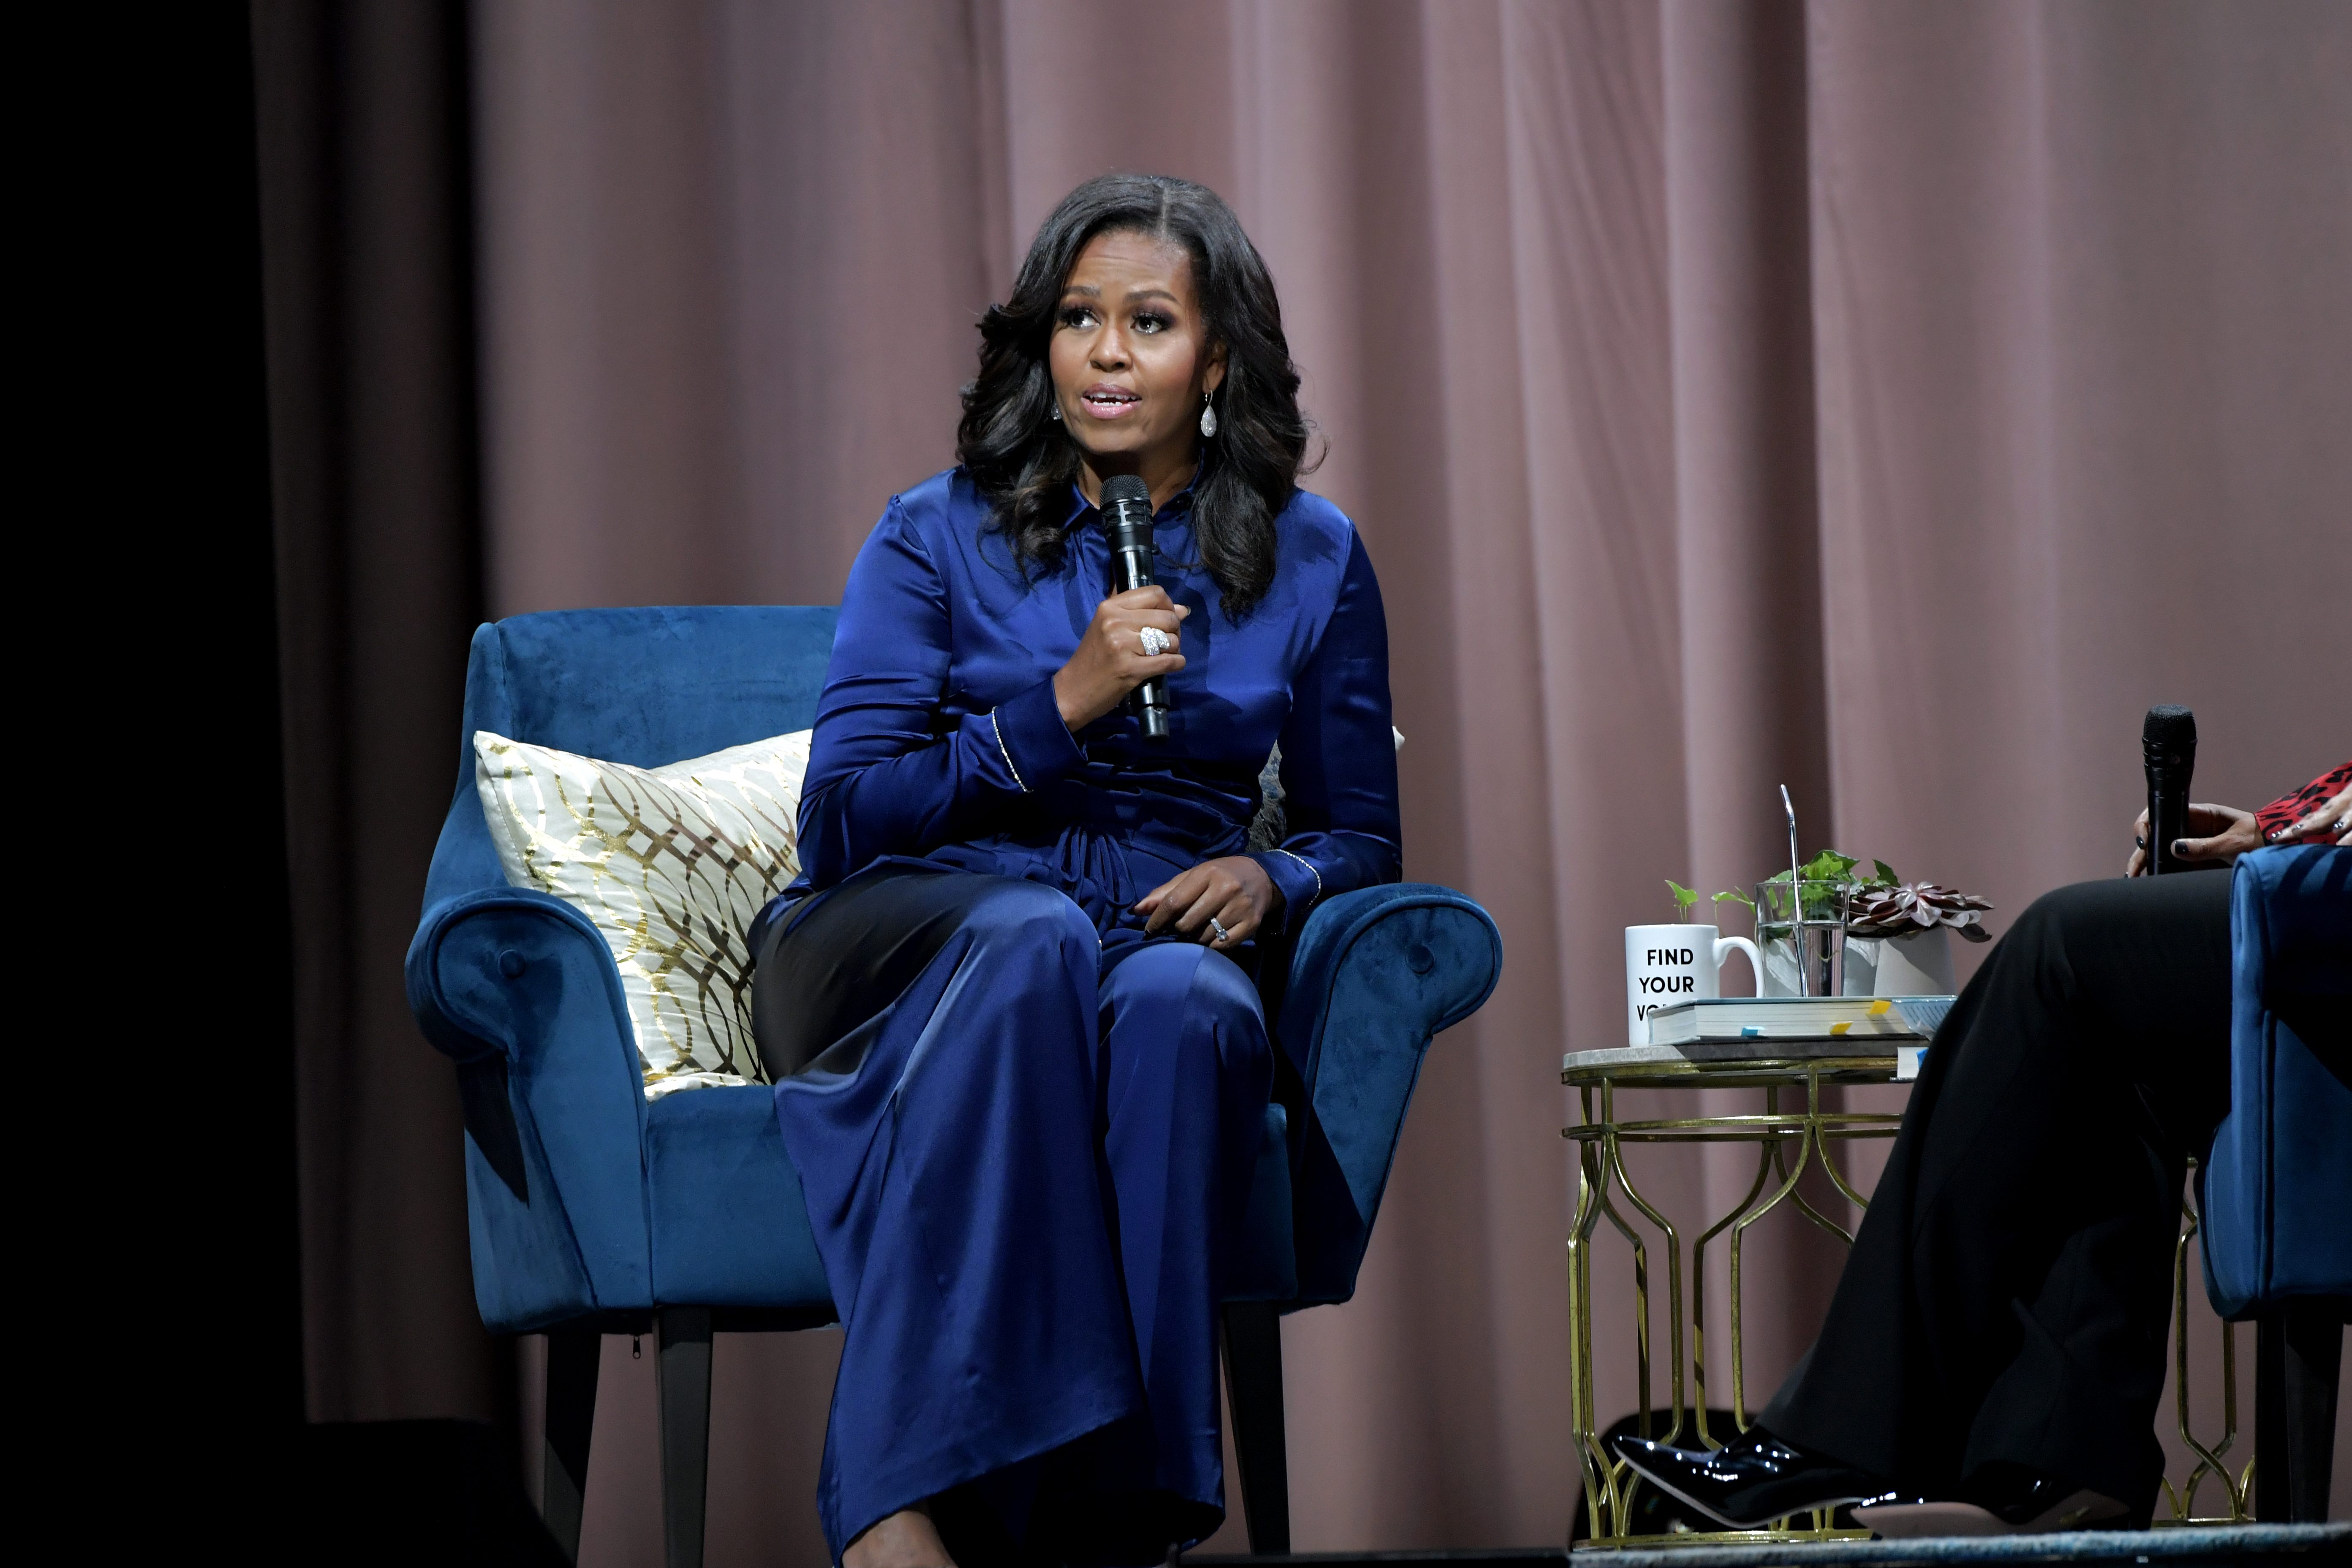 Michelle Obama Discusses Her New Book 'Becoming' With Michelle Norris